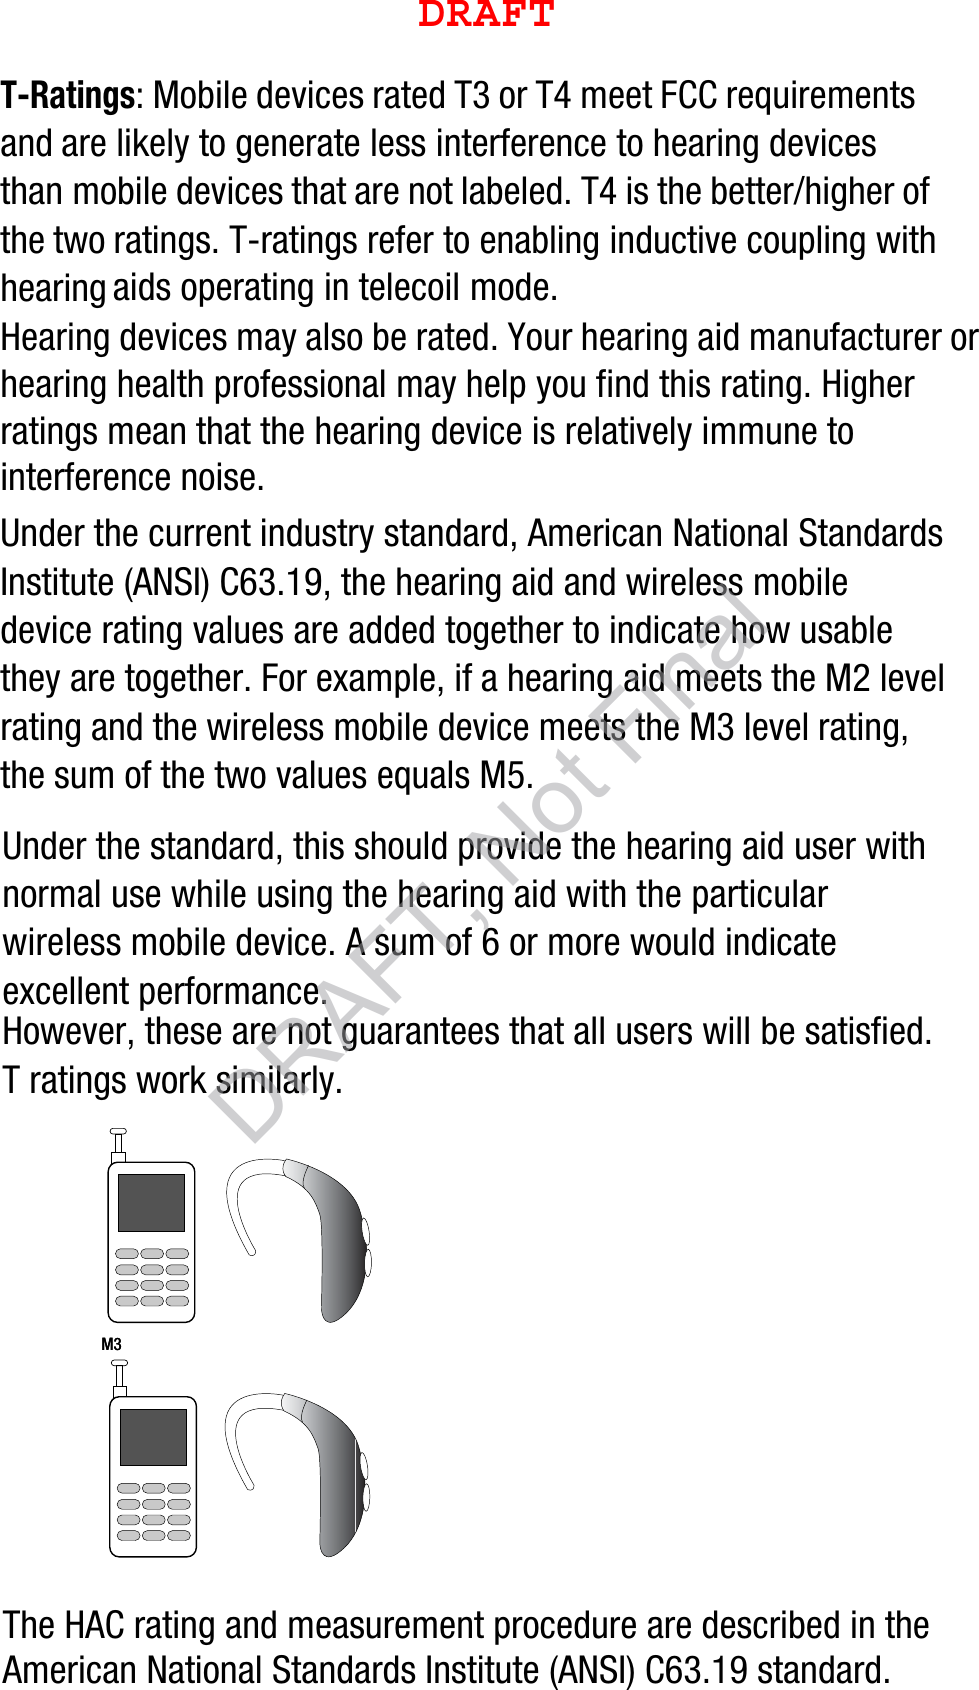 T-Ratings: Mobile devices rated T3 or T4 meet FCC requirements and are likely to generate less interference to hearing devices than mobile devices that are not labeled. T4 is the better/higher of the two ratings. T-ratings refer to enabling inductive coupling with hearing aids operating in telecoil mode.Hearing devices may also be rated. Your hearing aid manufacturer or hearing health professional may help you find this rating. Higher ratings mean that the hearing device is relatively immune to interference noise. Under the current industry standard, American National Standards Institute (ANSI) C63.19, the hearing aid and wireless mobile device rating values are added together to indicate how usable they are together. For example, if a hearing aid meets the M2 level rating and the wireless mobile device meets the M3 level rating, the sum of the two values equals M5. Under the standard, this should provide the hearing aid user with normal use while using the hearing aid with the particular wireless mobile device. A sum of 6 or more would indicate excellent performance.  However, these are not guarantees that all users will be satisfied. T ratings work similarly.The HAC rating and measurement procedure are described in the American National Standards Institute (ANSI) C63.19 standard.    M3       M3        DRAFT, Not FinalDRAFT